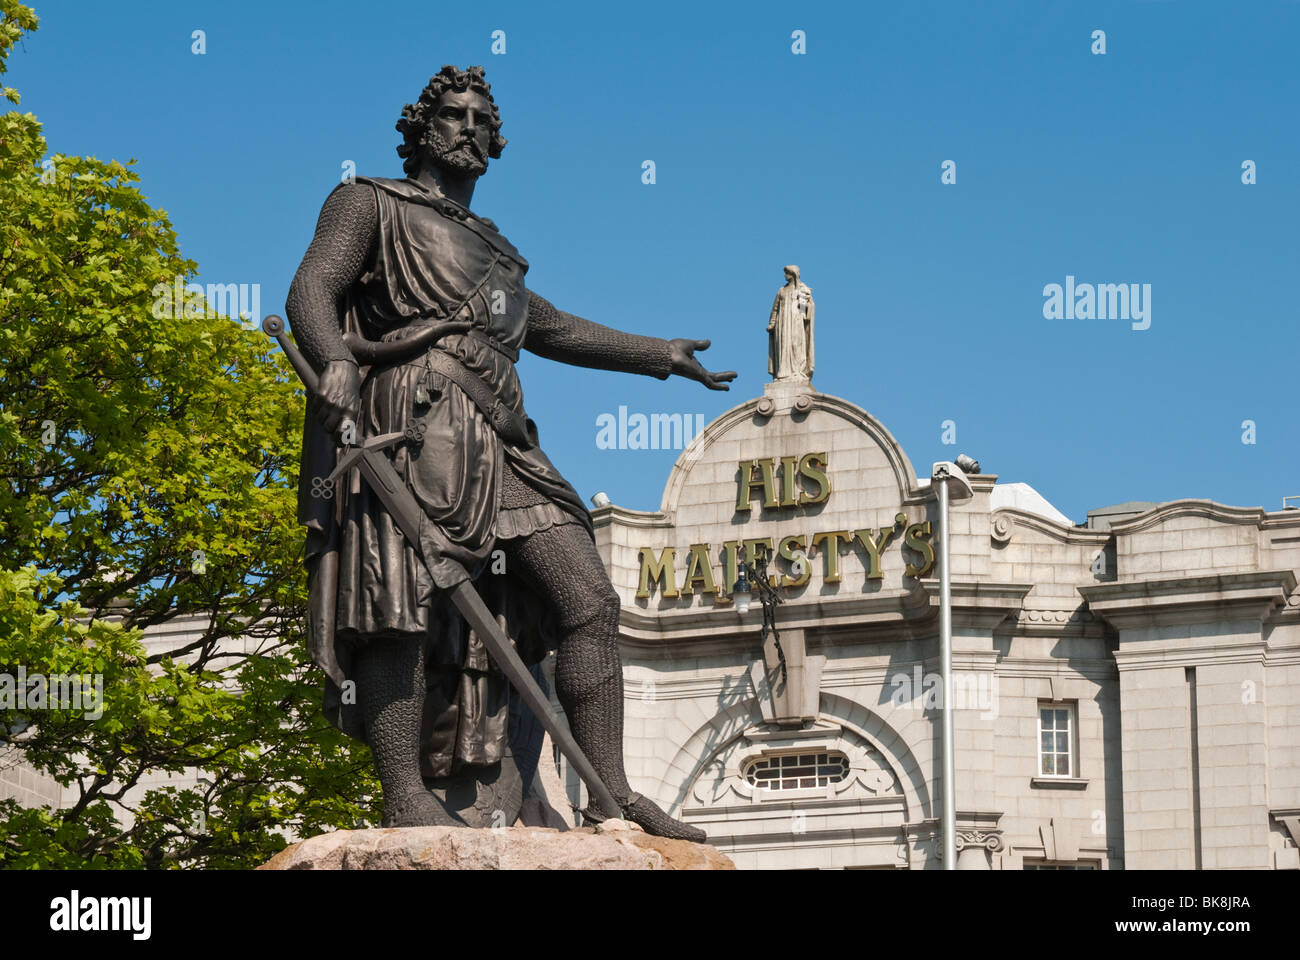 William Wallace Statue with His Majesty's Theatre Stock Photo